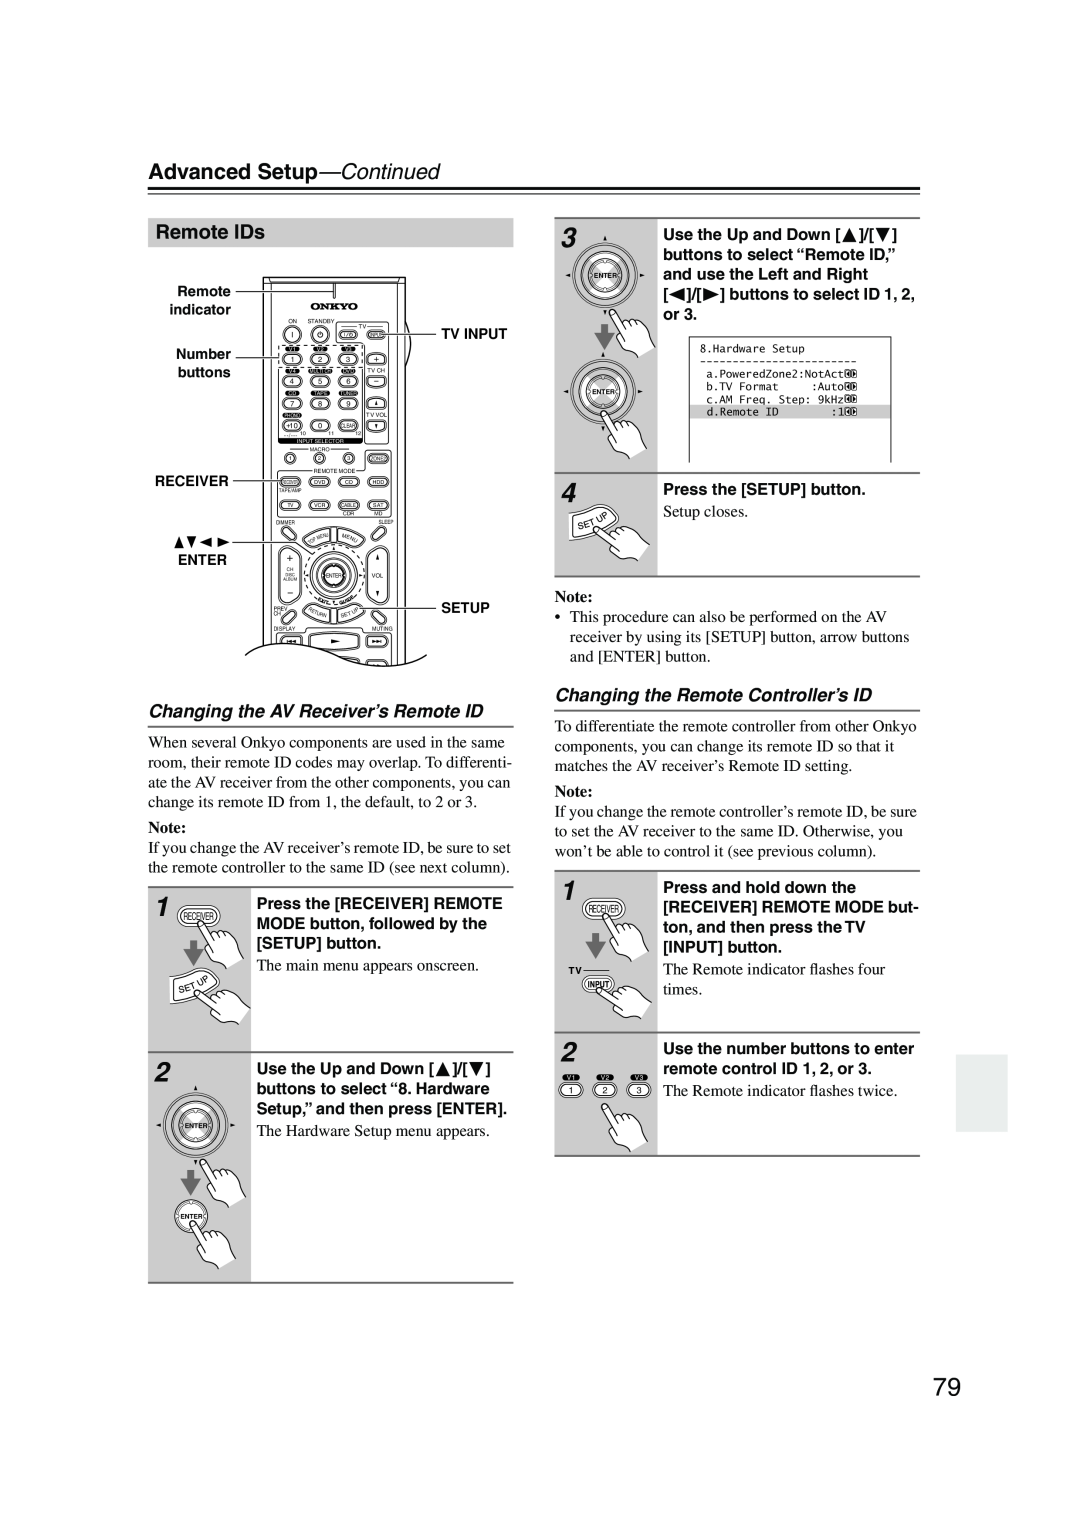 Onkyo SR804 instruction manual Remote IDs, Changing the AV Receiver’s Remote ID, Changing the Remote Controller’s ID, times 